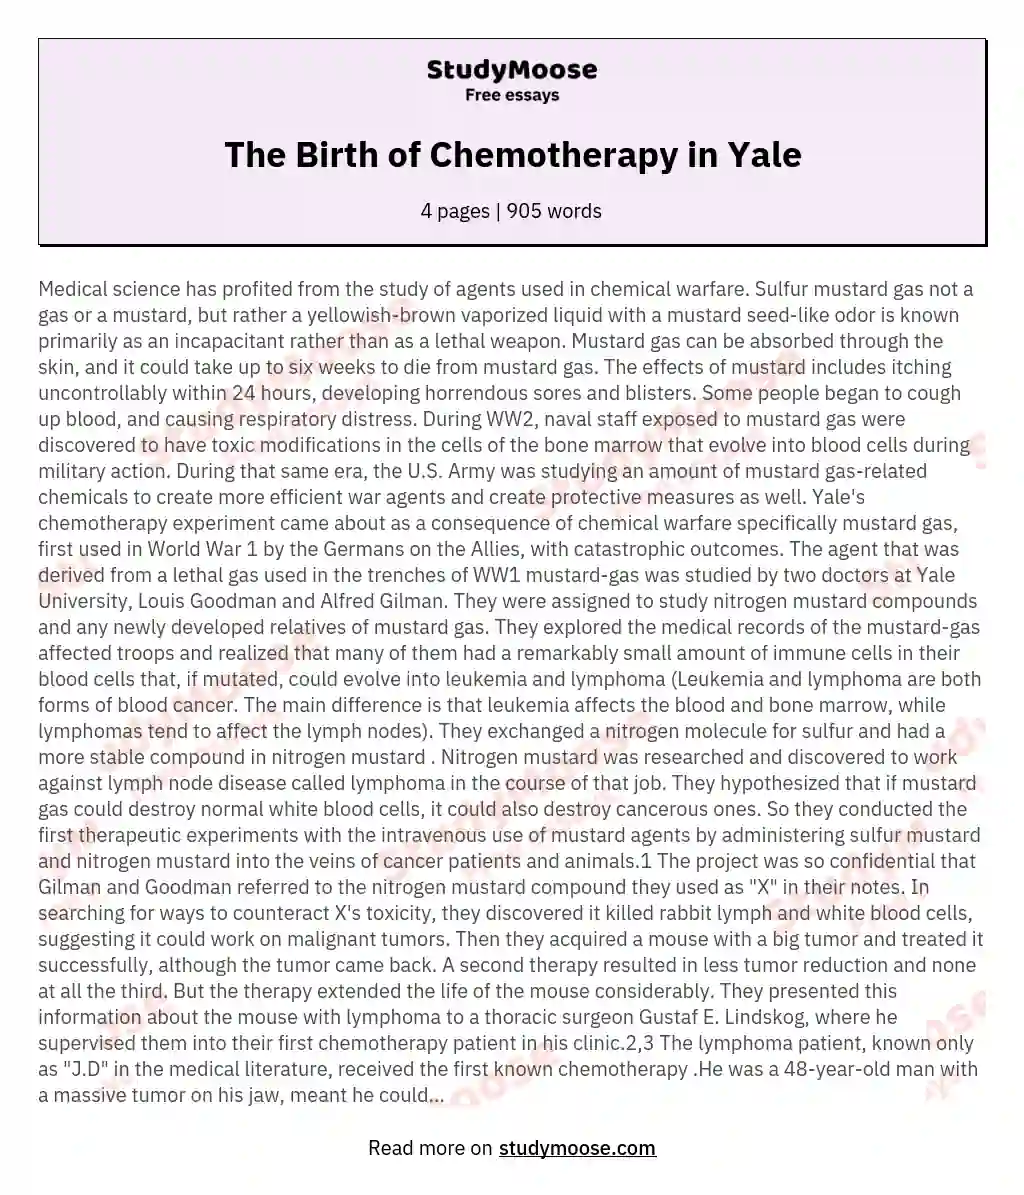 The Birth of Chemotherapy in Yale